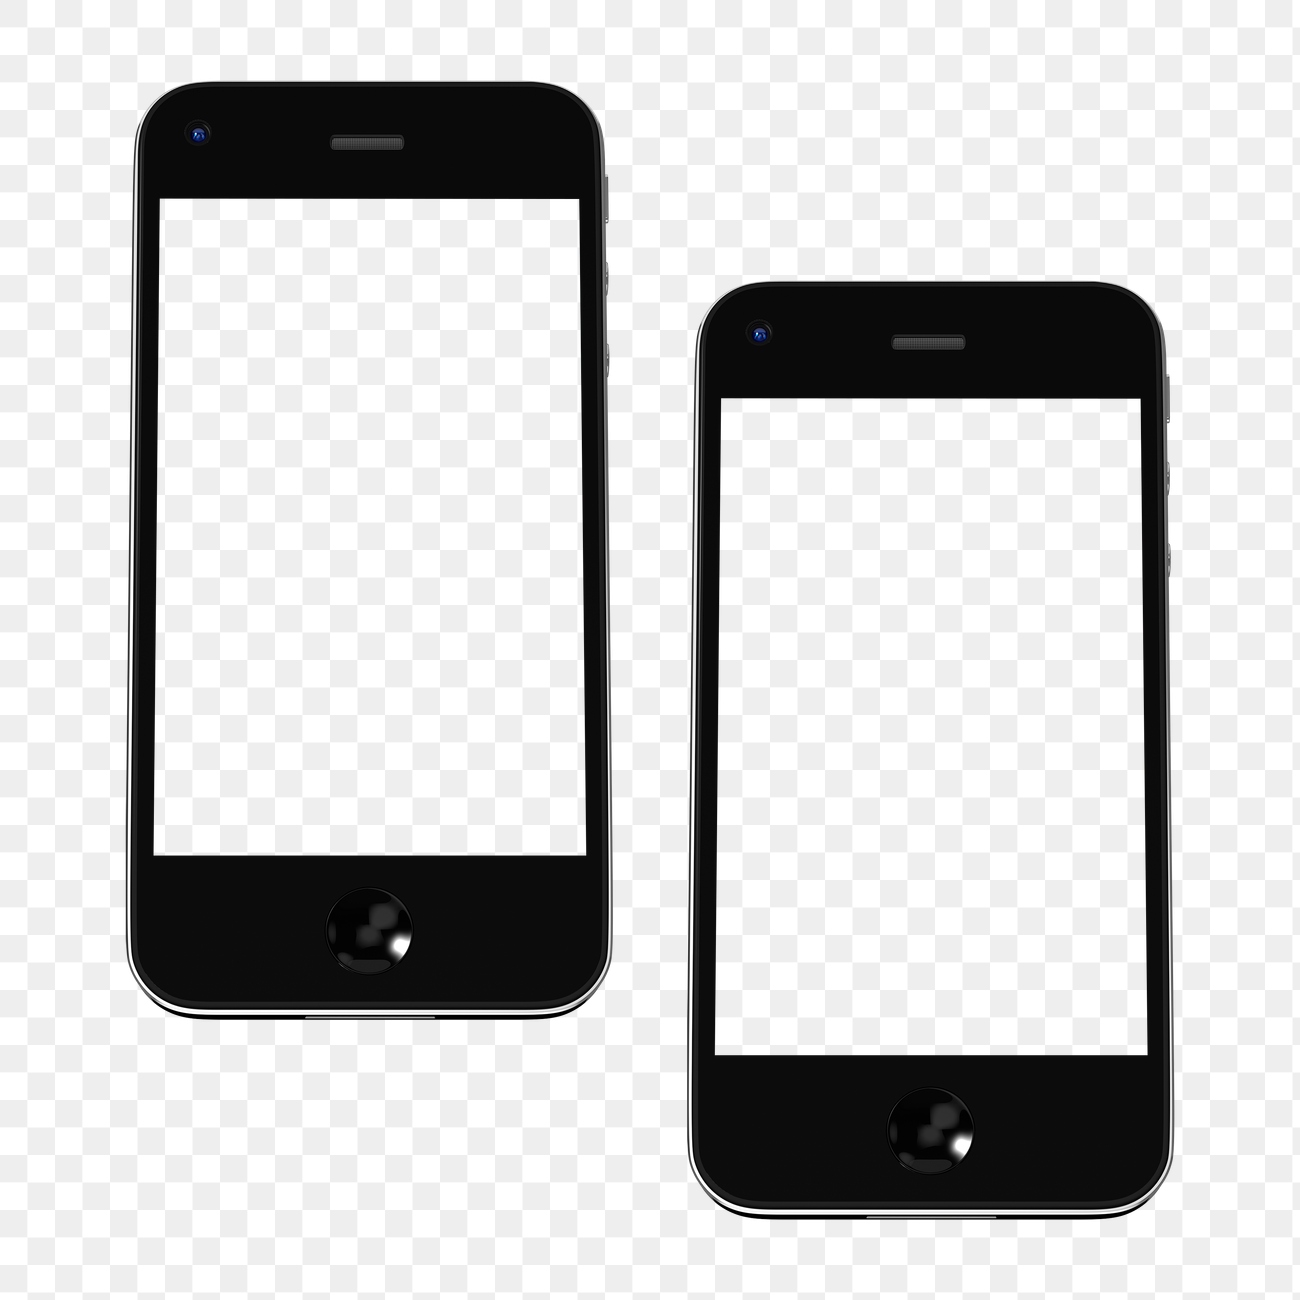 Mobile phone | Transparent background PNG image and graphic | rawpixel